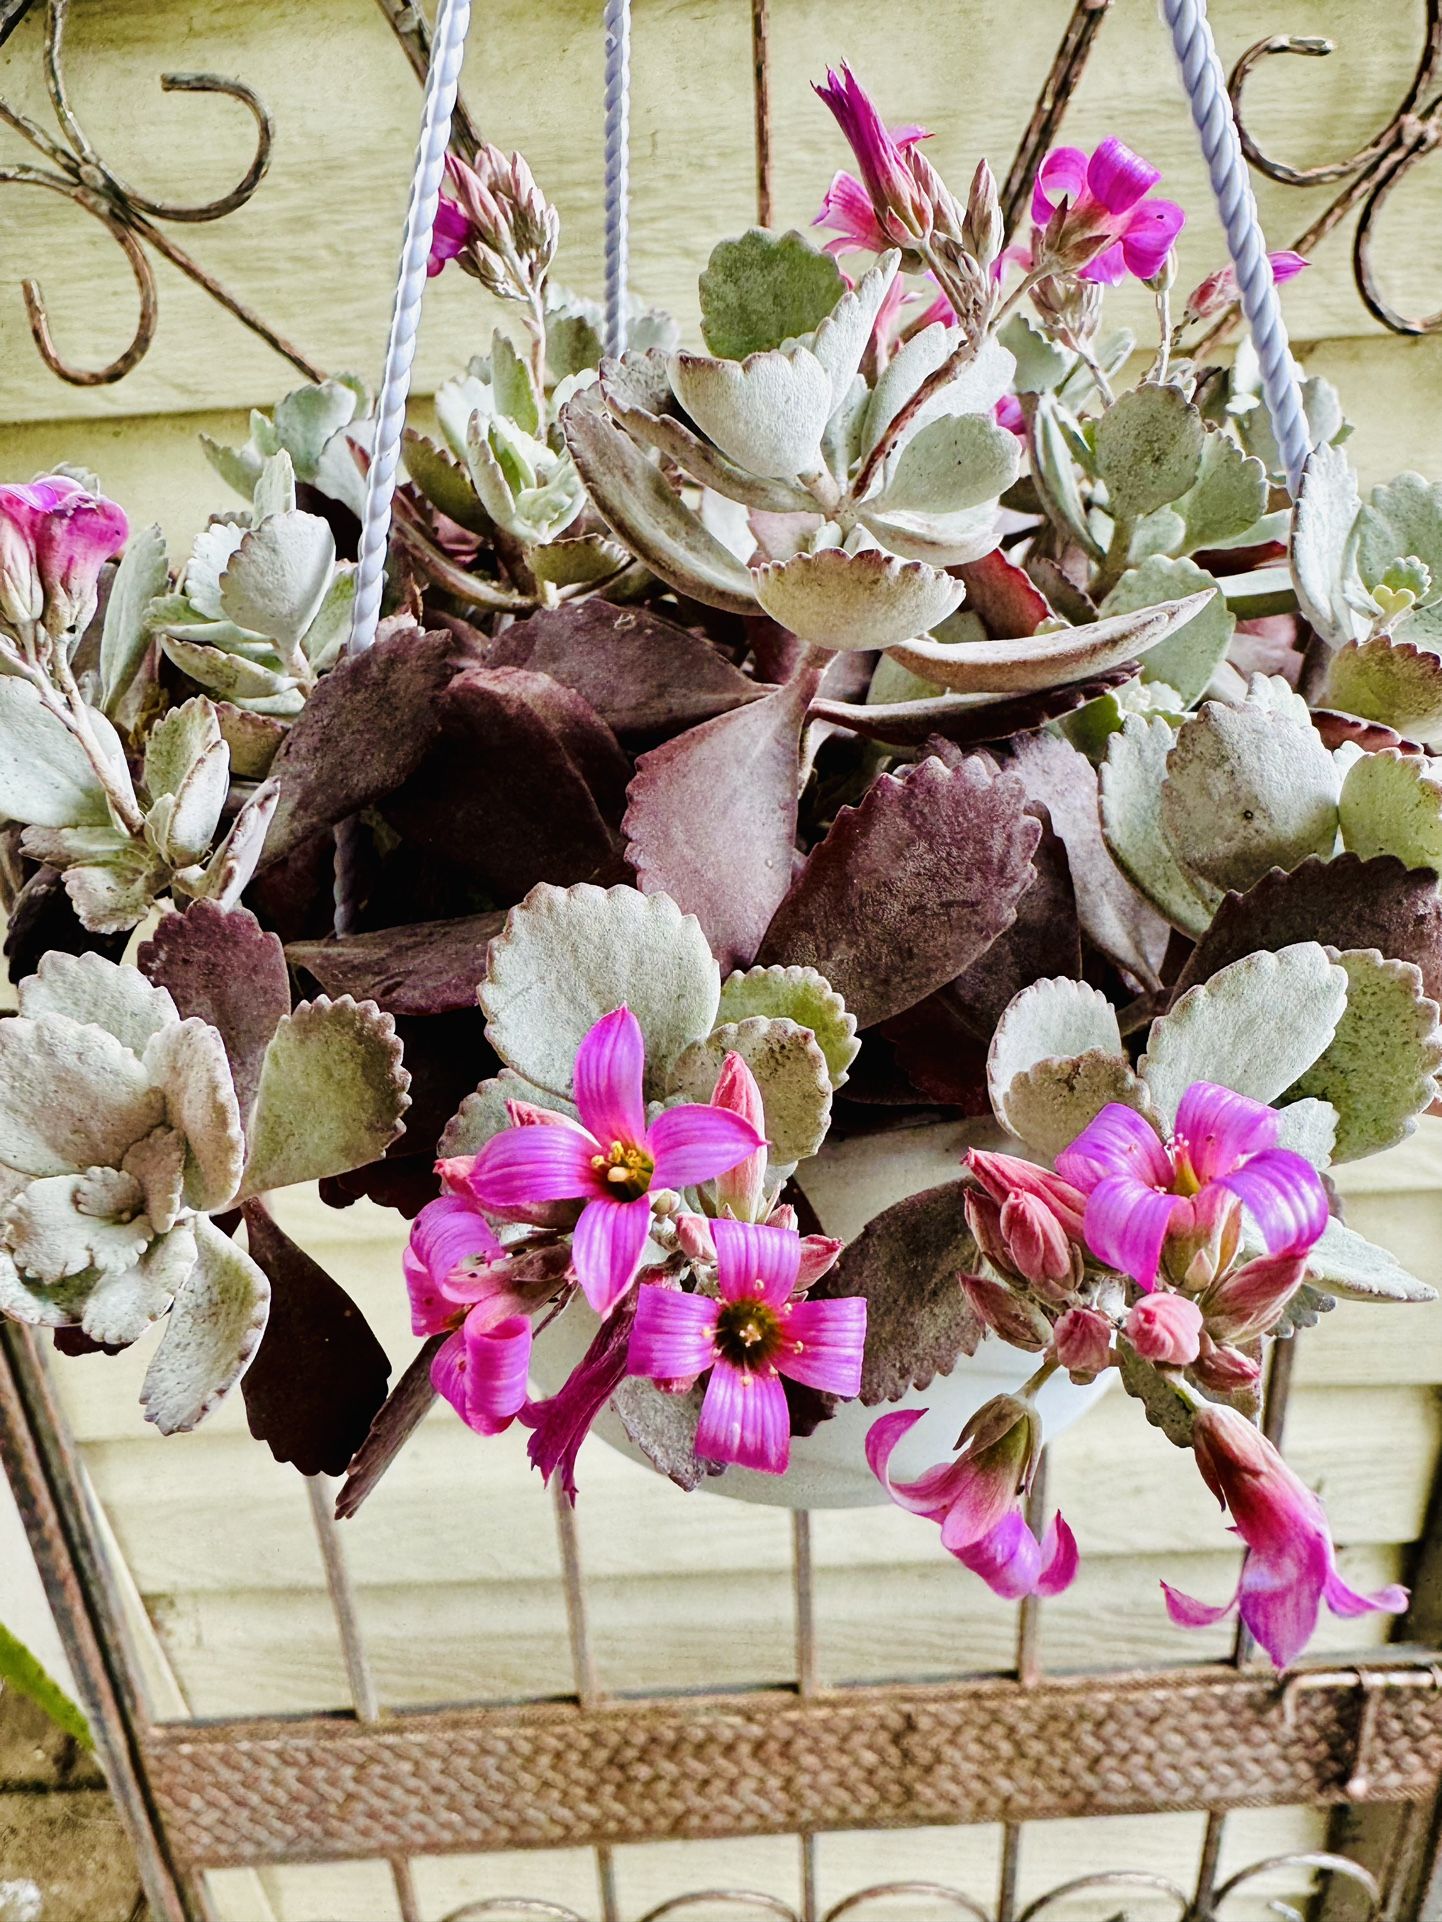 RARE KALANCHOE PUMILA SUCCULENT HANGING PLANT - In Bloom